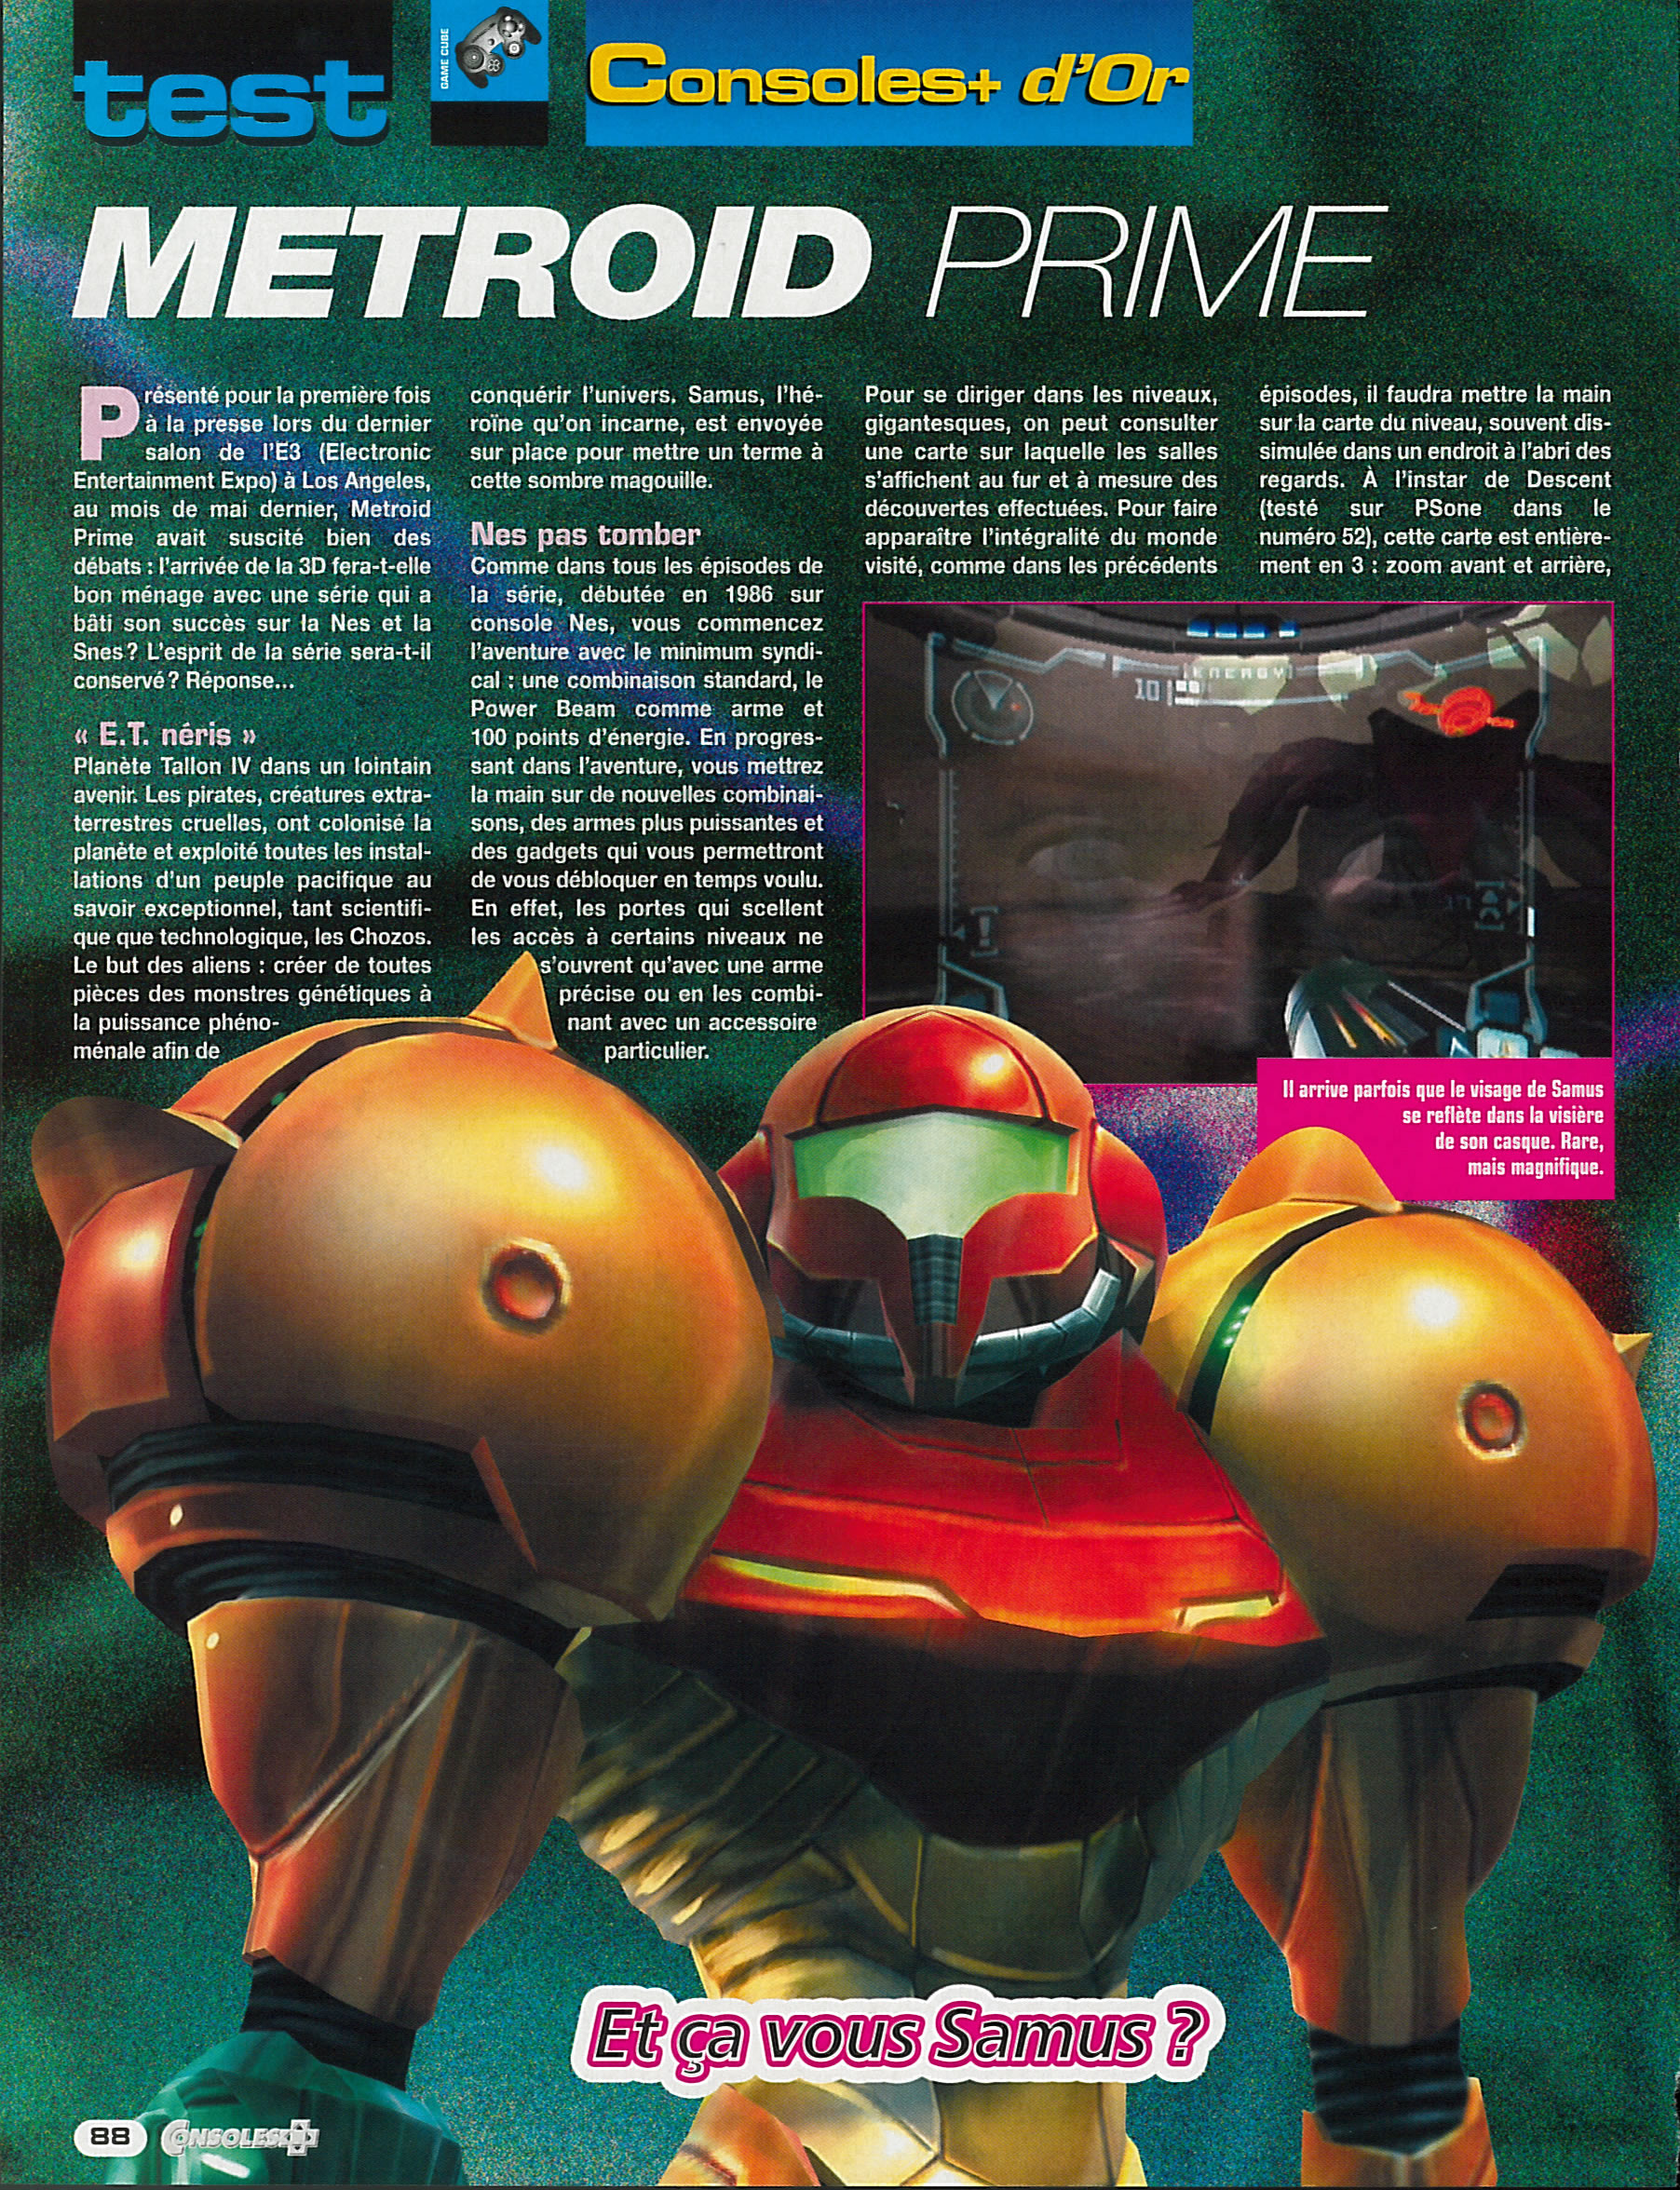 [TEST] Metroid Prime Remastered (Switch) Consoles%20%2B%20132%20-%20Page%20088%20%28janvier%202003%29